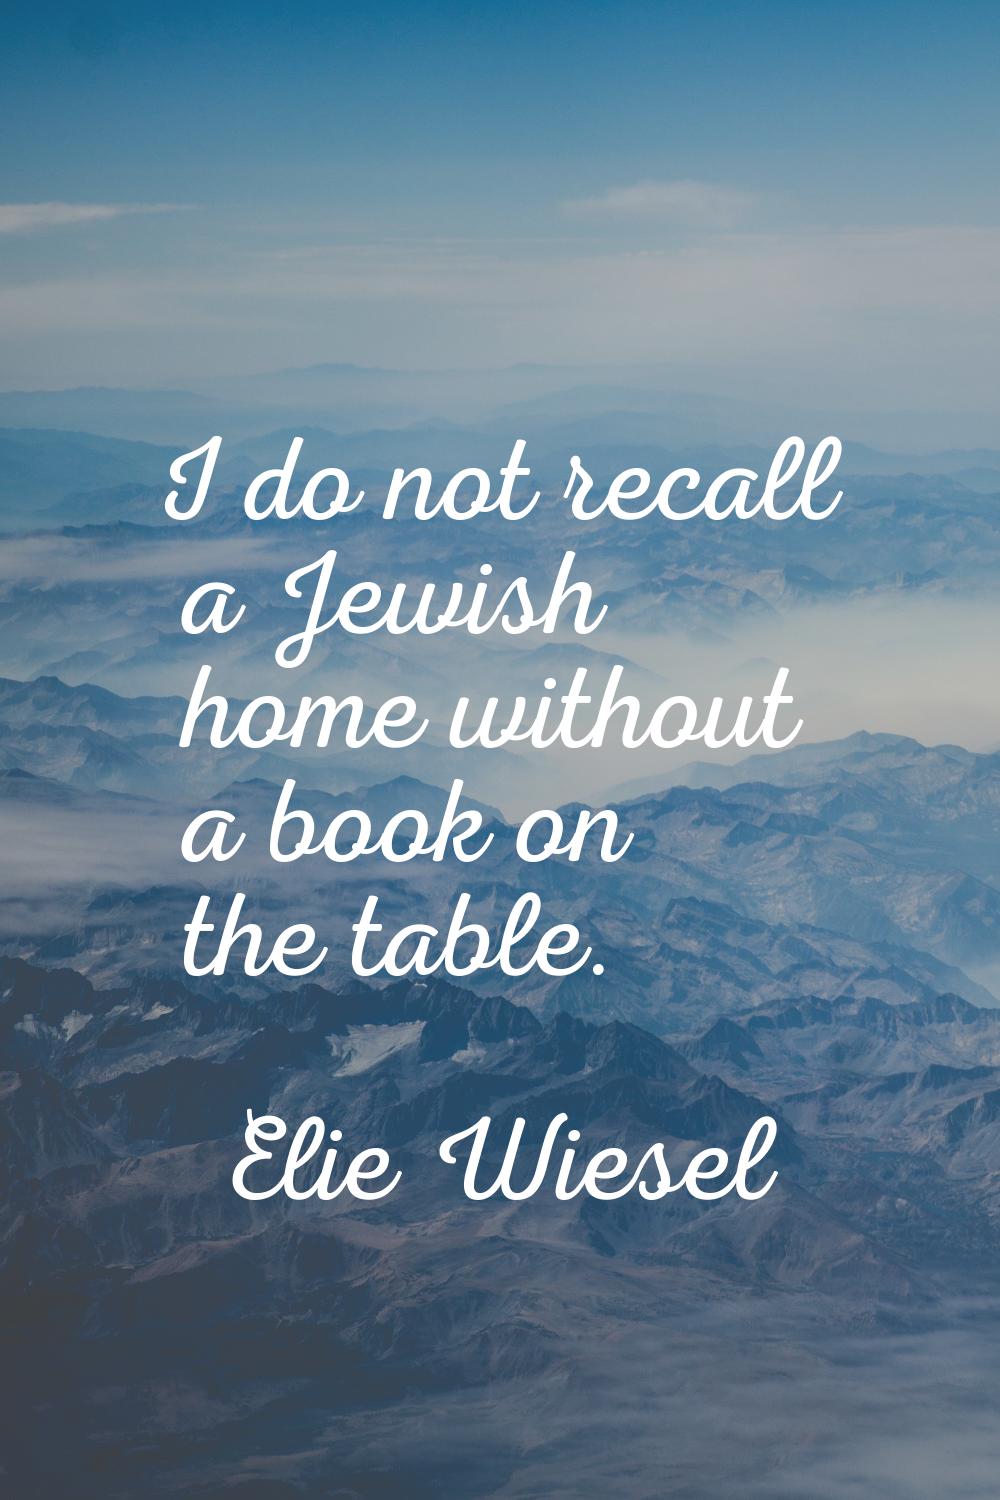 I do not recall a Jewish home without a book on the table.